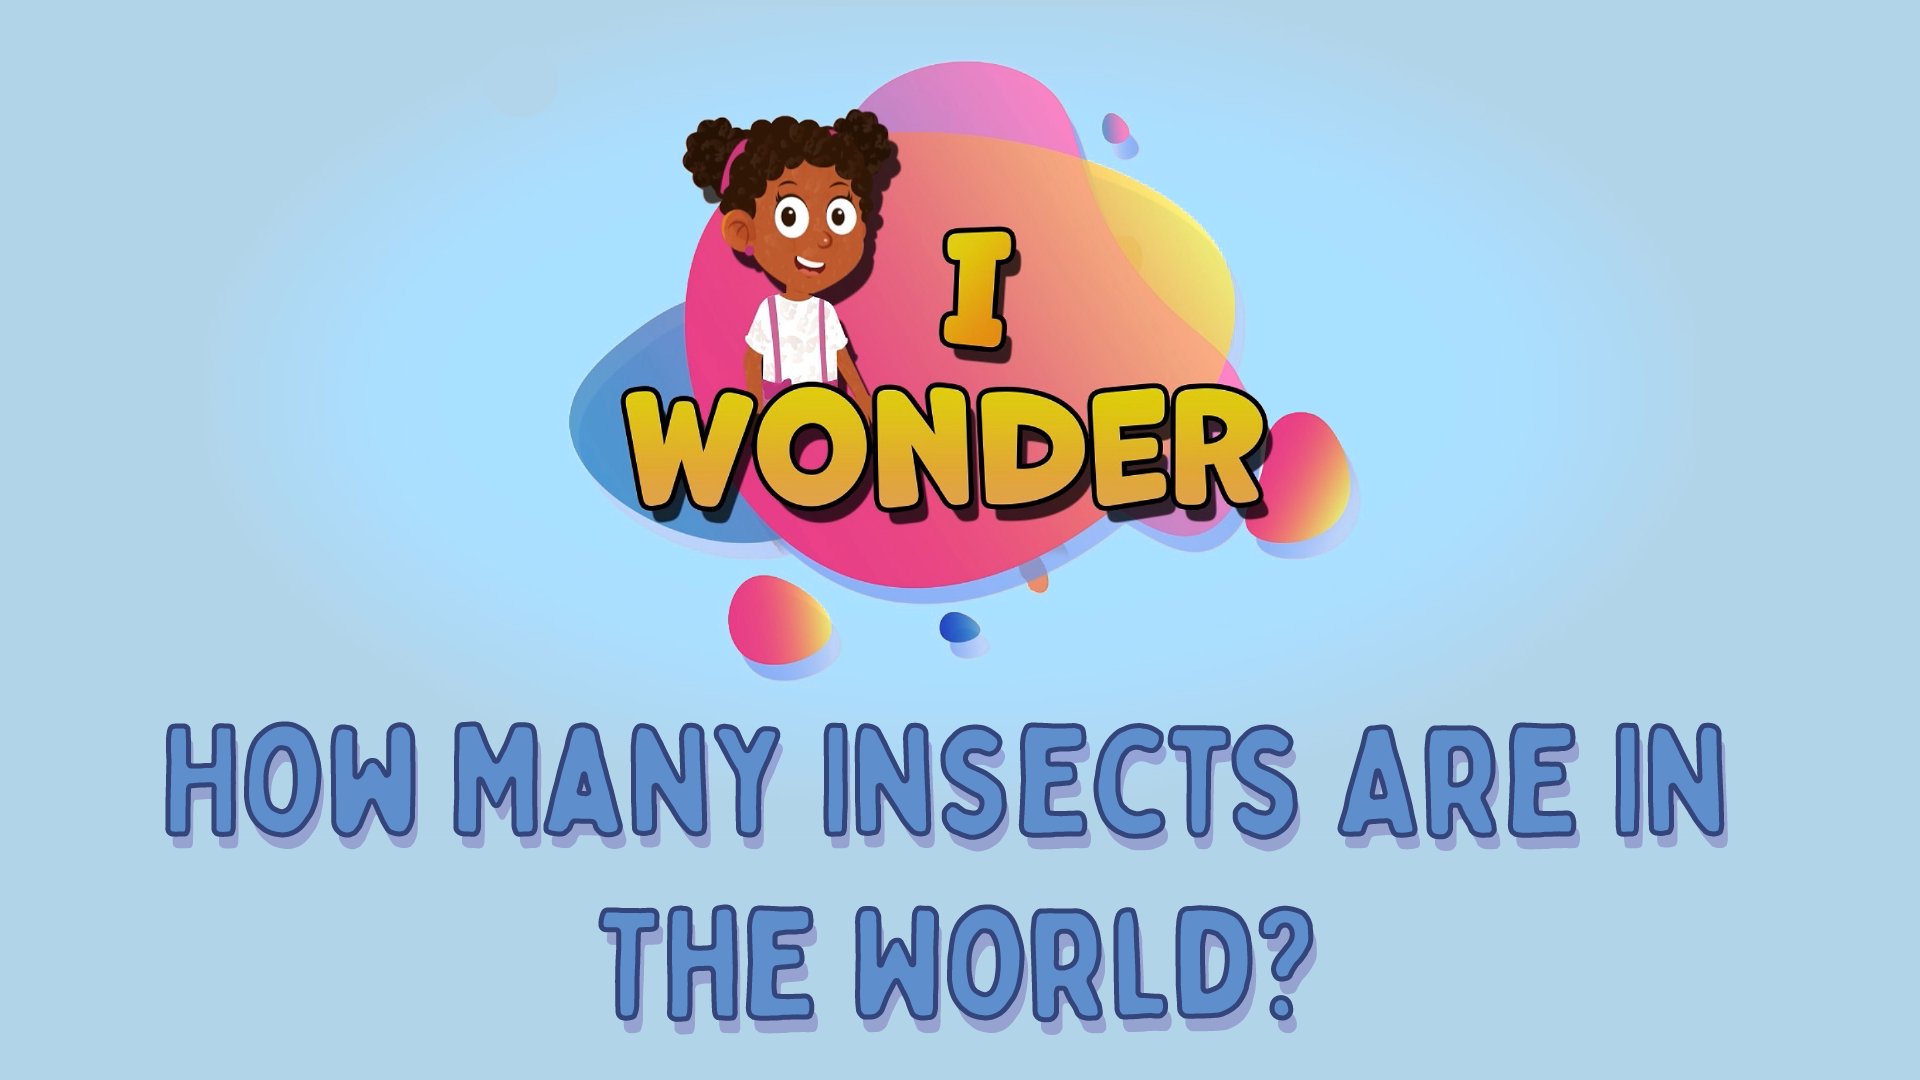 How Many Insects Are In The World?